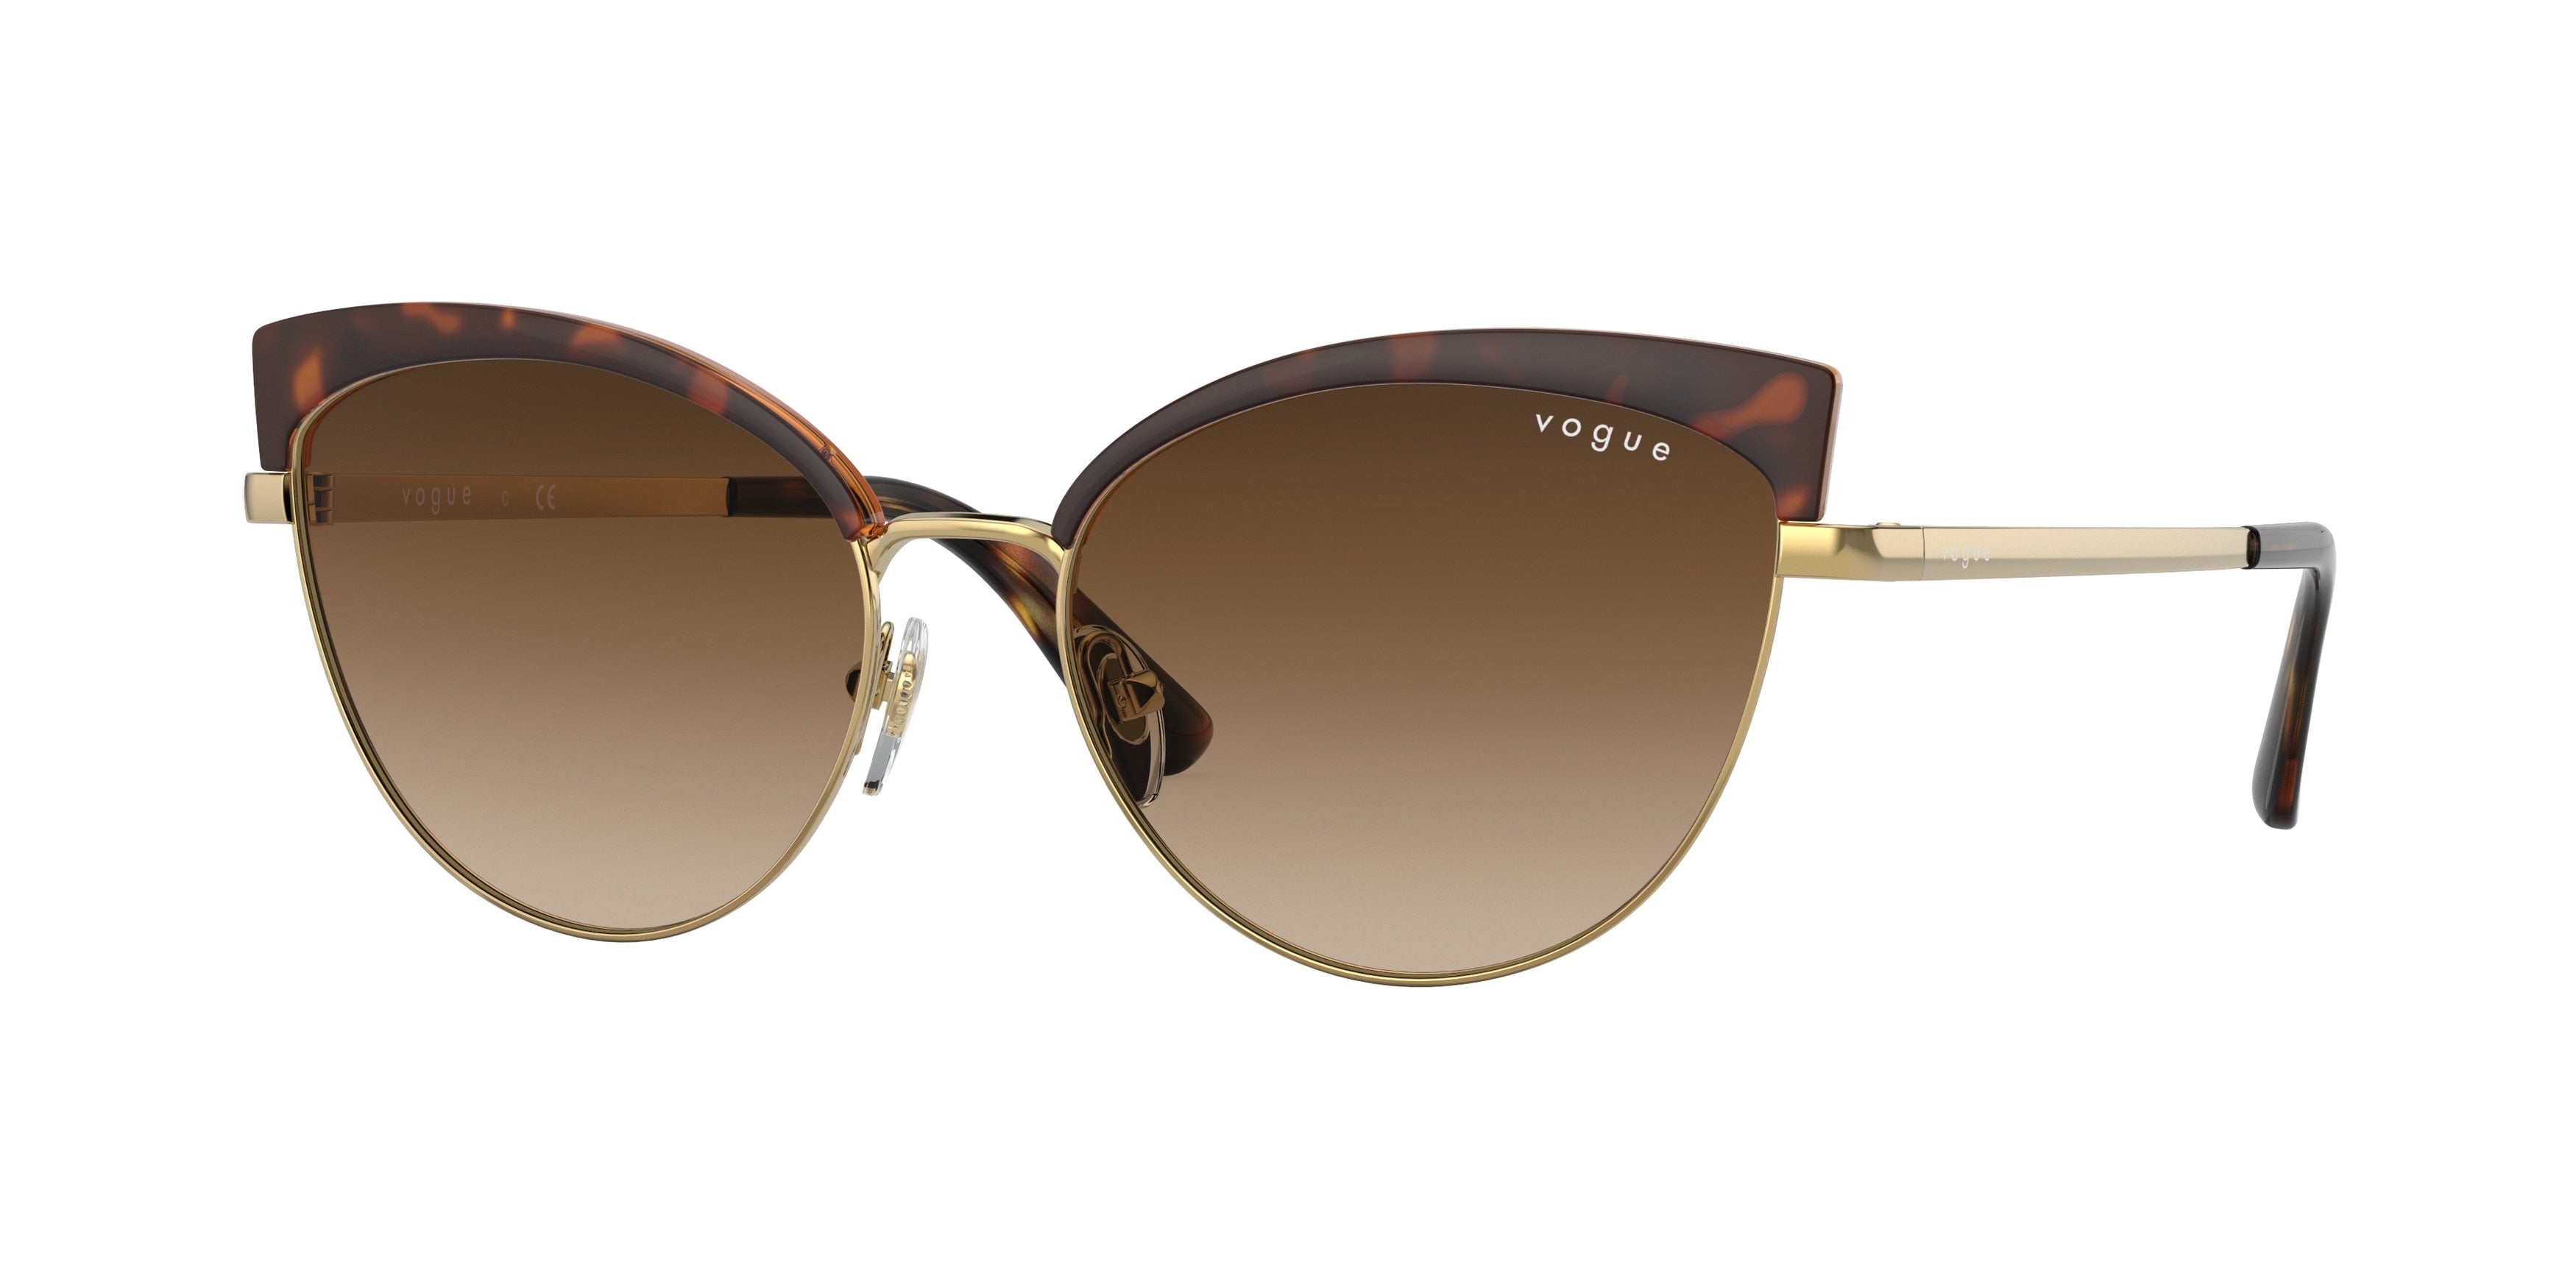 Vogue VO4188S Butterfly Sunglasses  280/13-Havana/Gold 55-135-16 - Color Map Brown